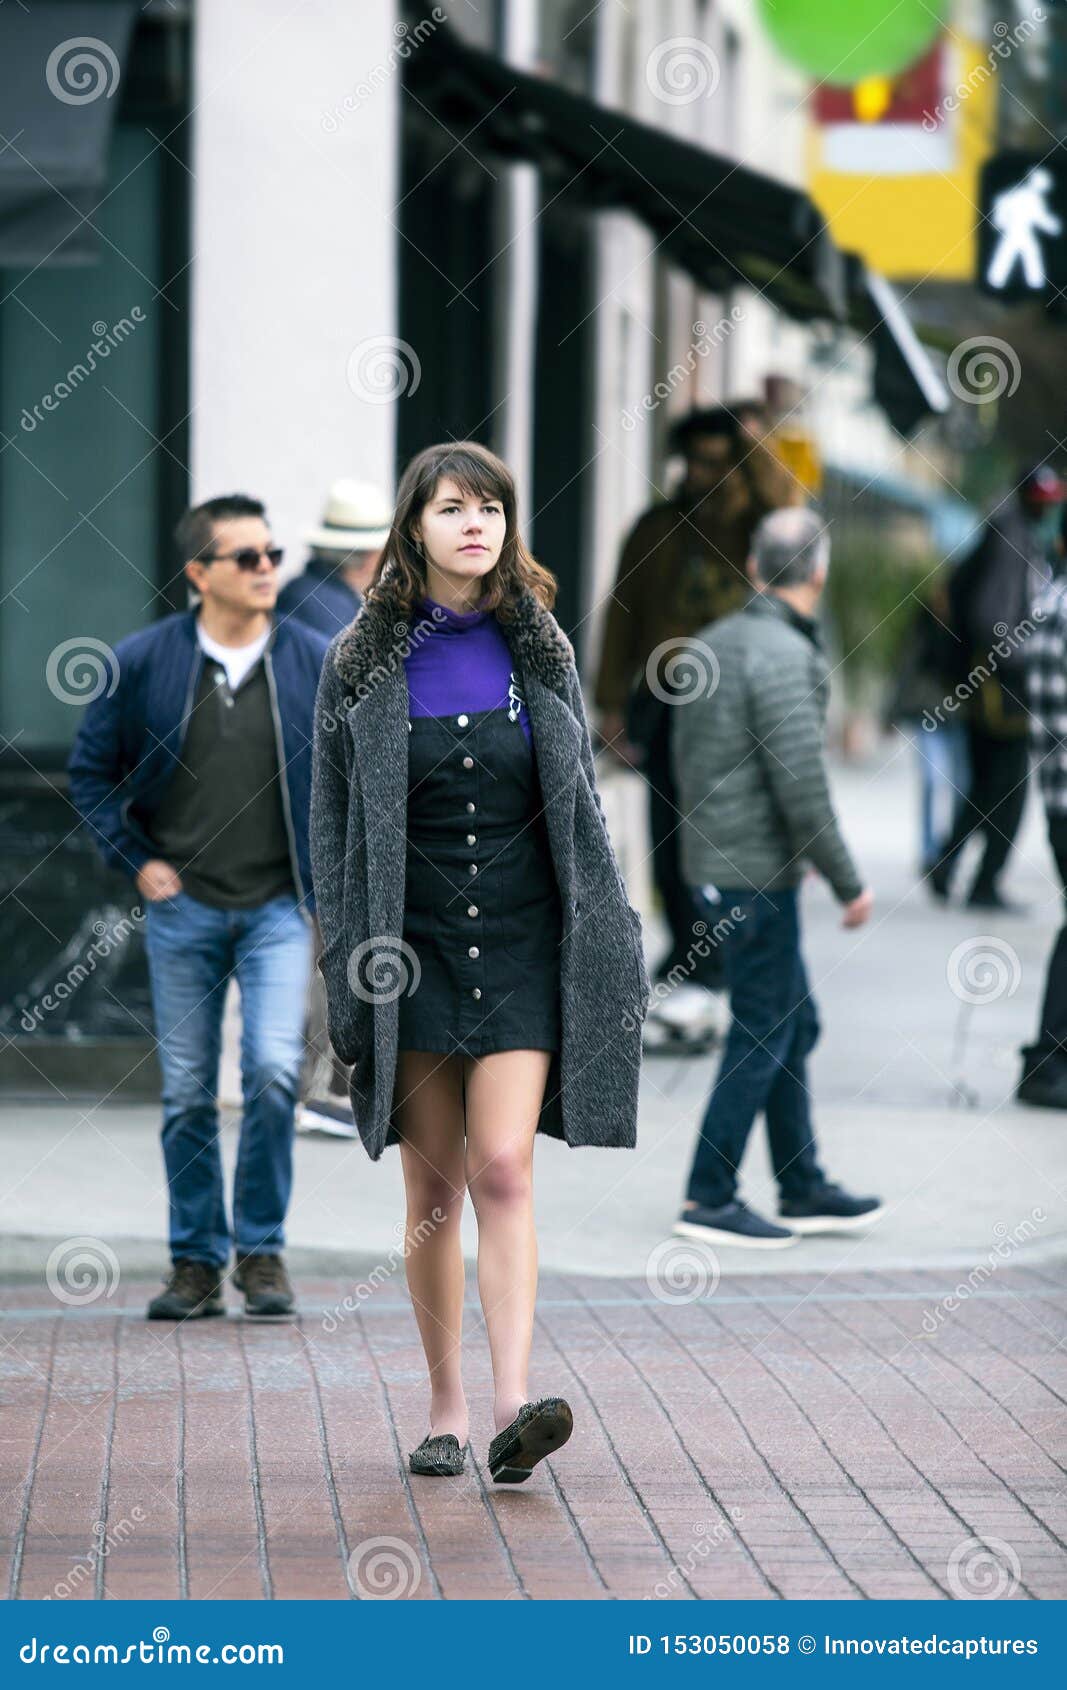 Female Pedestrian Walking at a Cross Walk in a City Stock Photo - Image ...